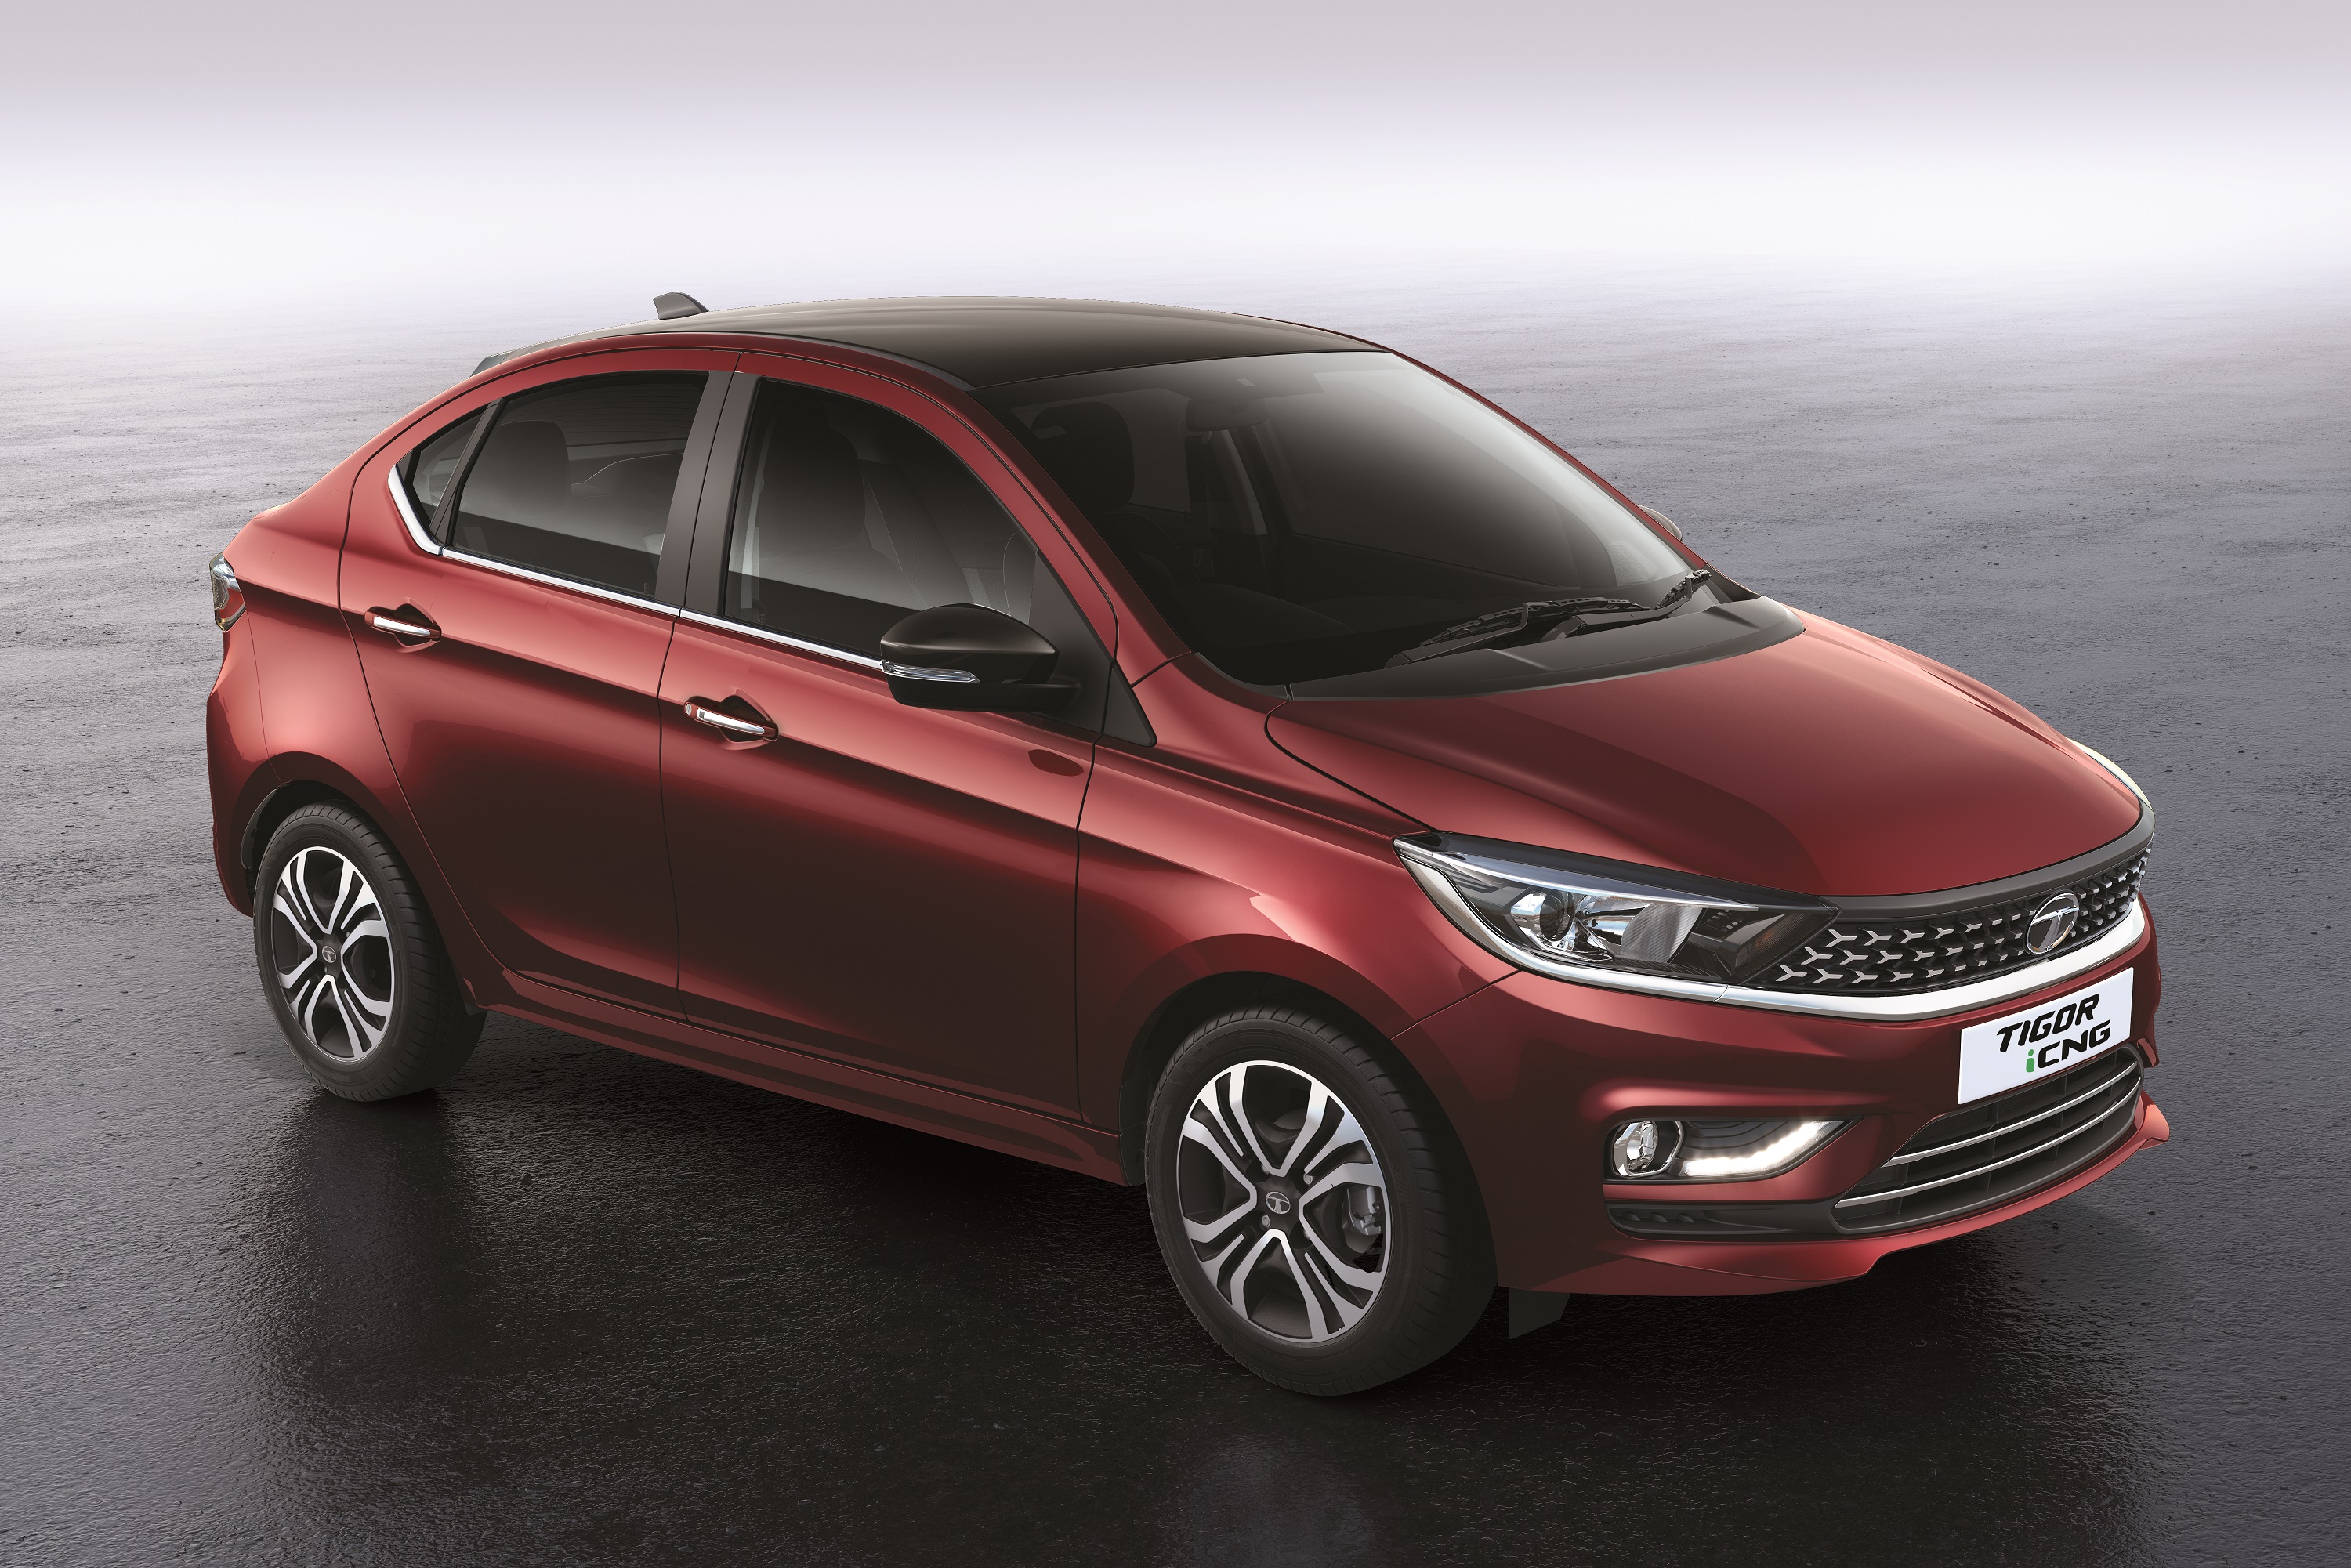 TATA TIAGO CNG, TIGOR CNG LAUNCHED; PRICES START FROM RS 6.09 LAKH